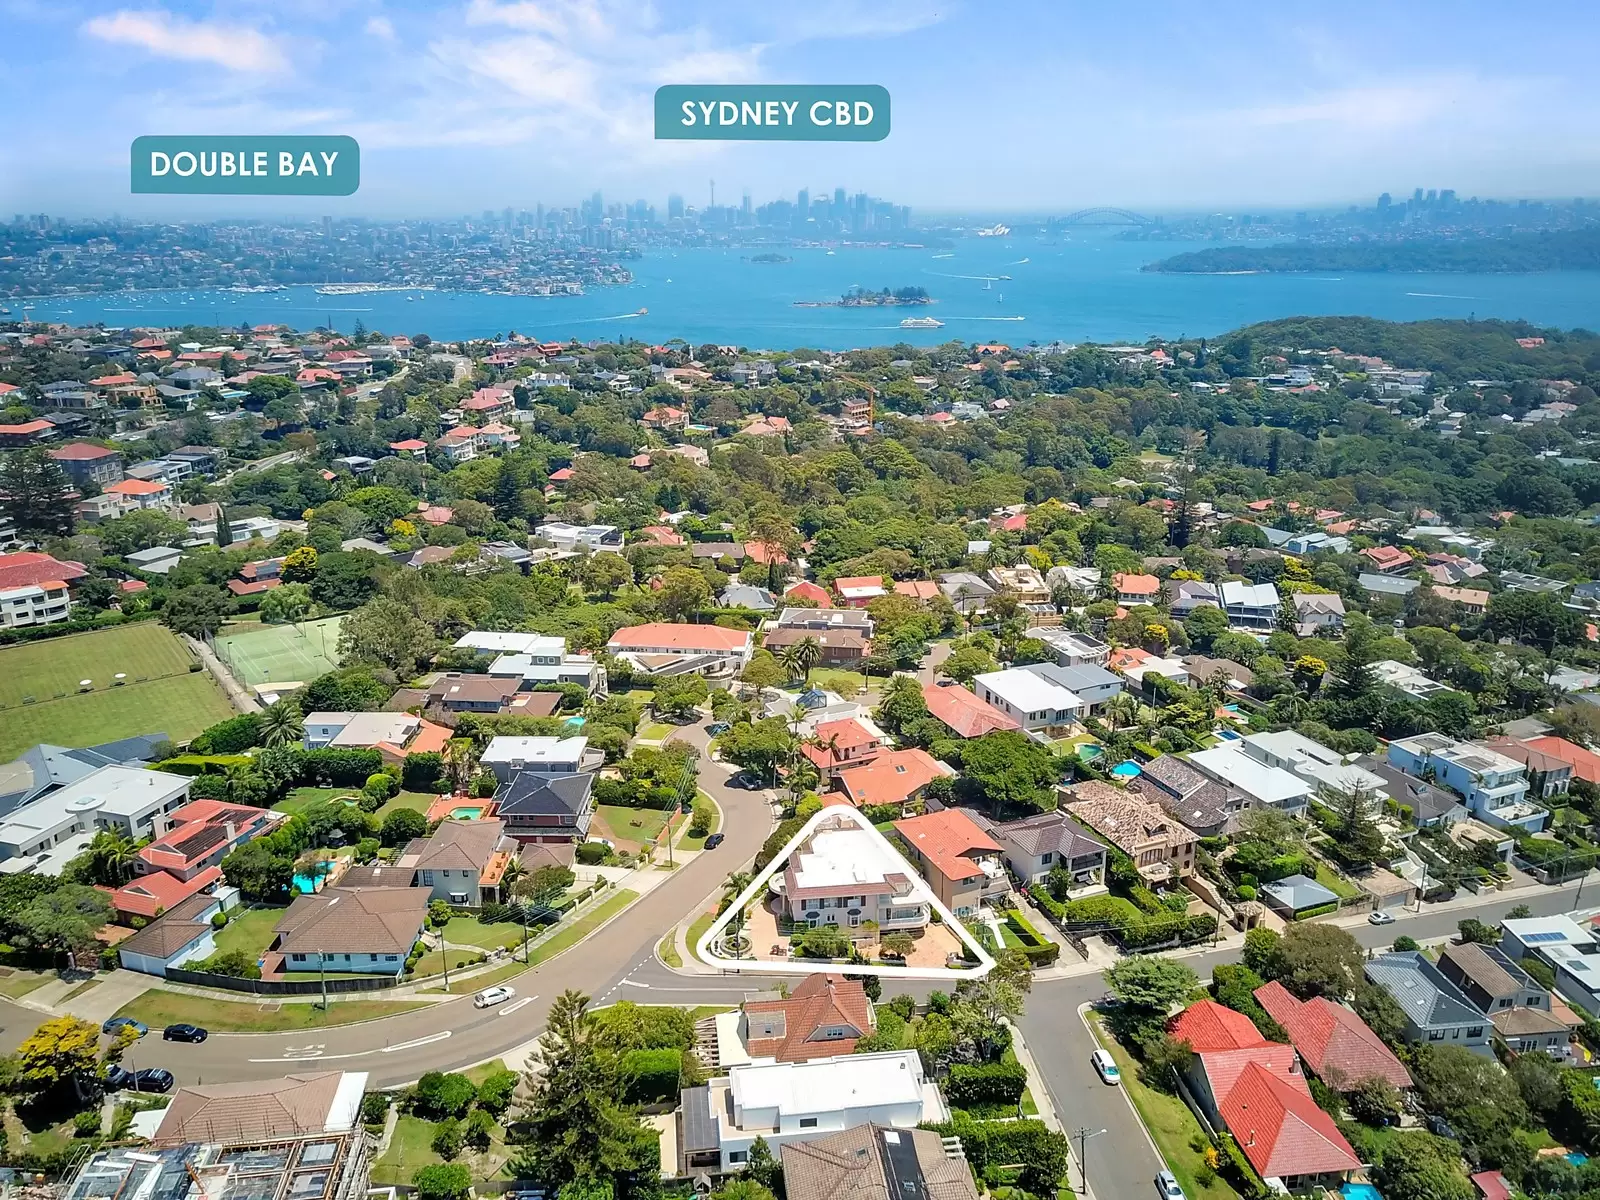 Photo #14: 2 Village Lower Road, Vaucluse - Sold by Sydney Sotheby's International Realty